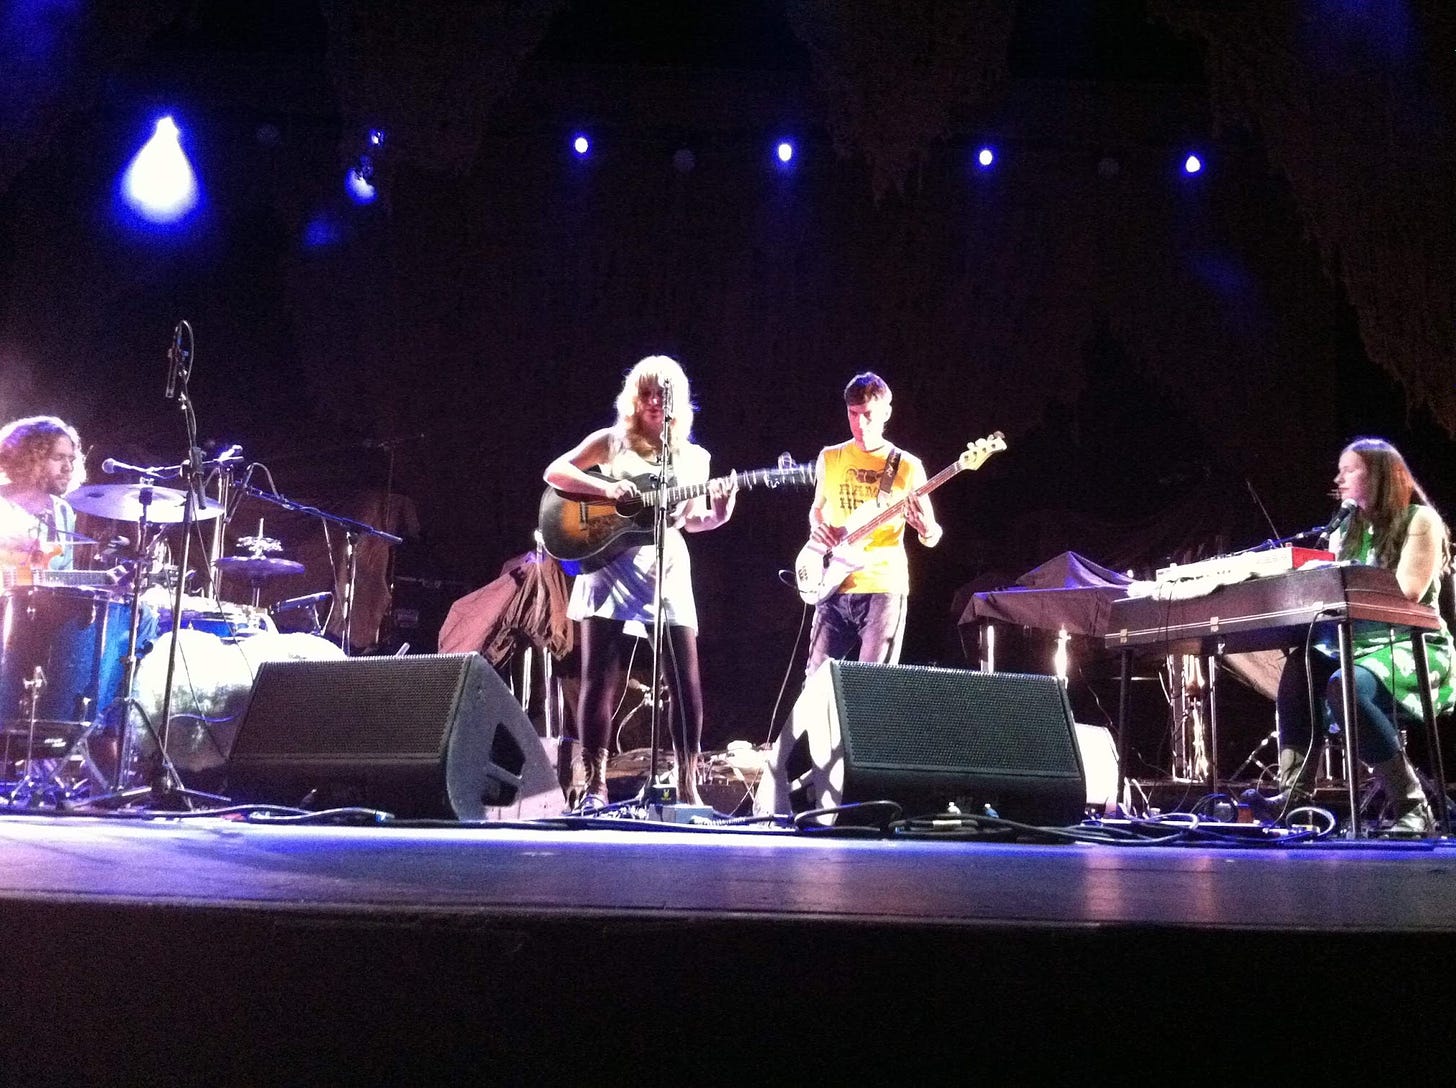 Picture of Anais Mitchell playing at radio city. She is holing a guitar in the middle with the drummer to her left, bassist close on her right and electric piano player further right. 